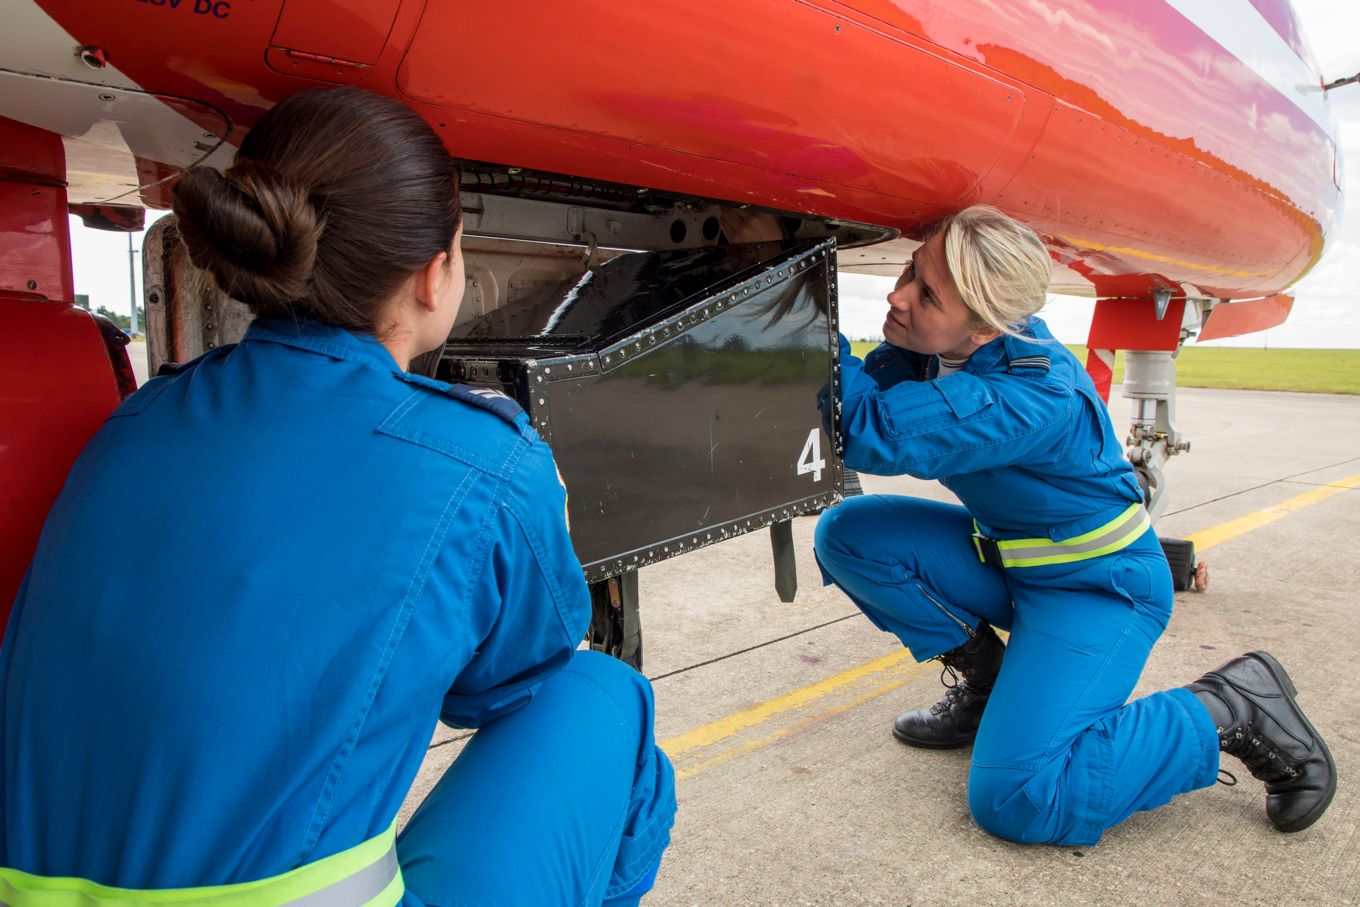 Flight Lieutenant Alicia Mason during her tour as a Junior Engineering Officer with the Red Arrows in June 2019